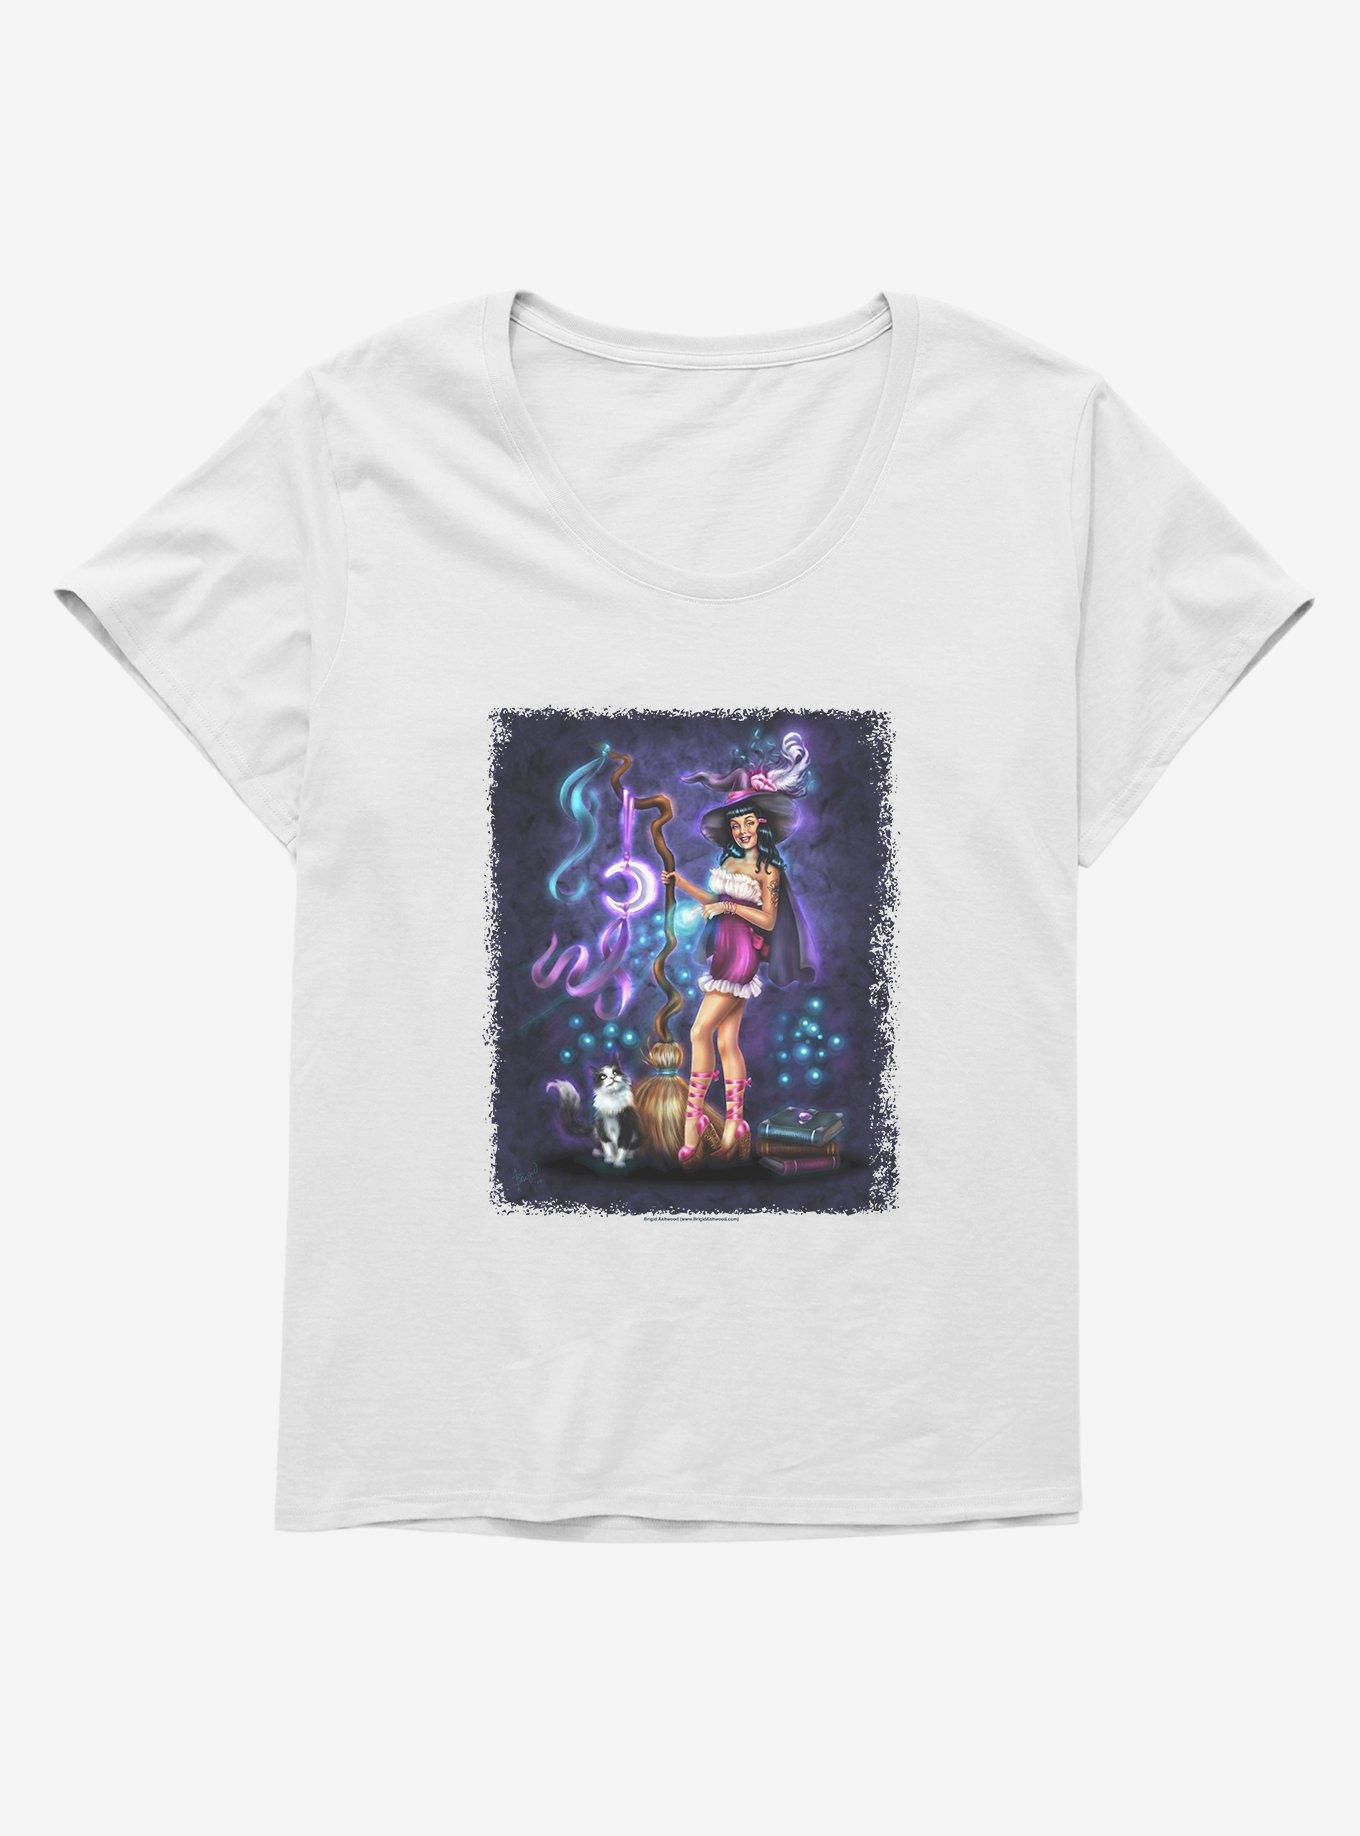 Witch Purrfect Spell Girls T-Shirt Plus Size by Brigid Ashwood, , hi-res